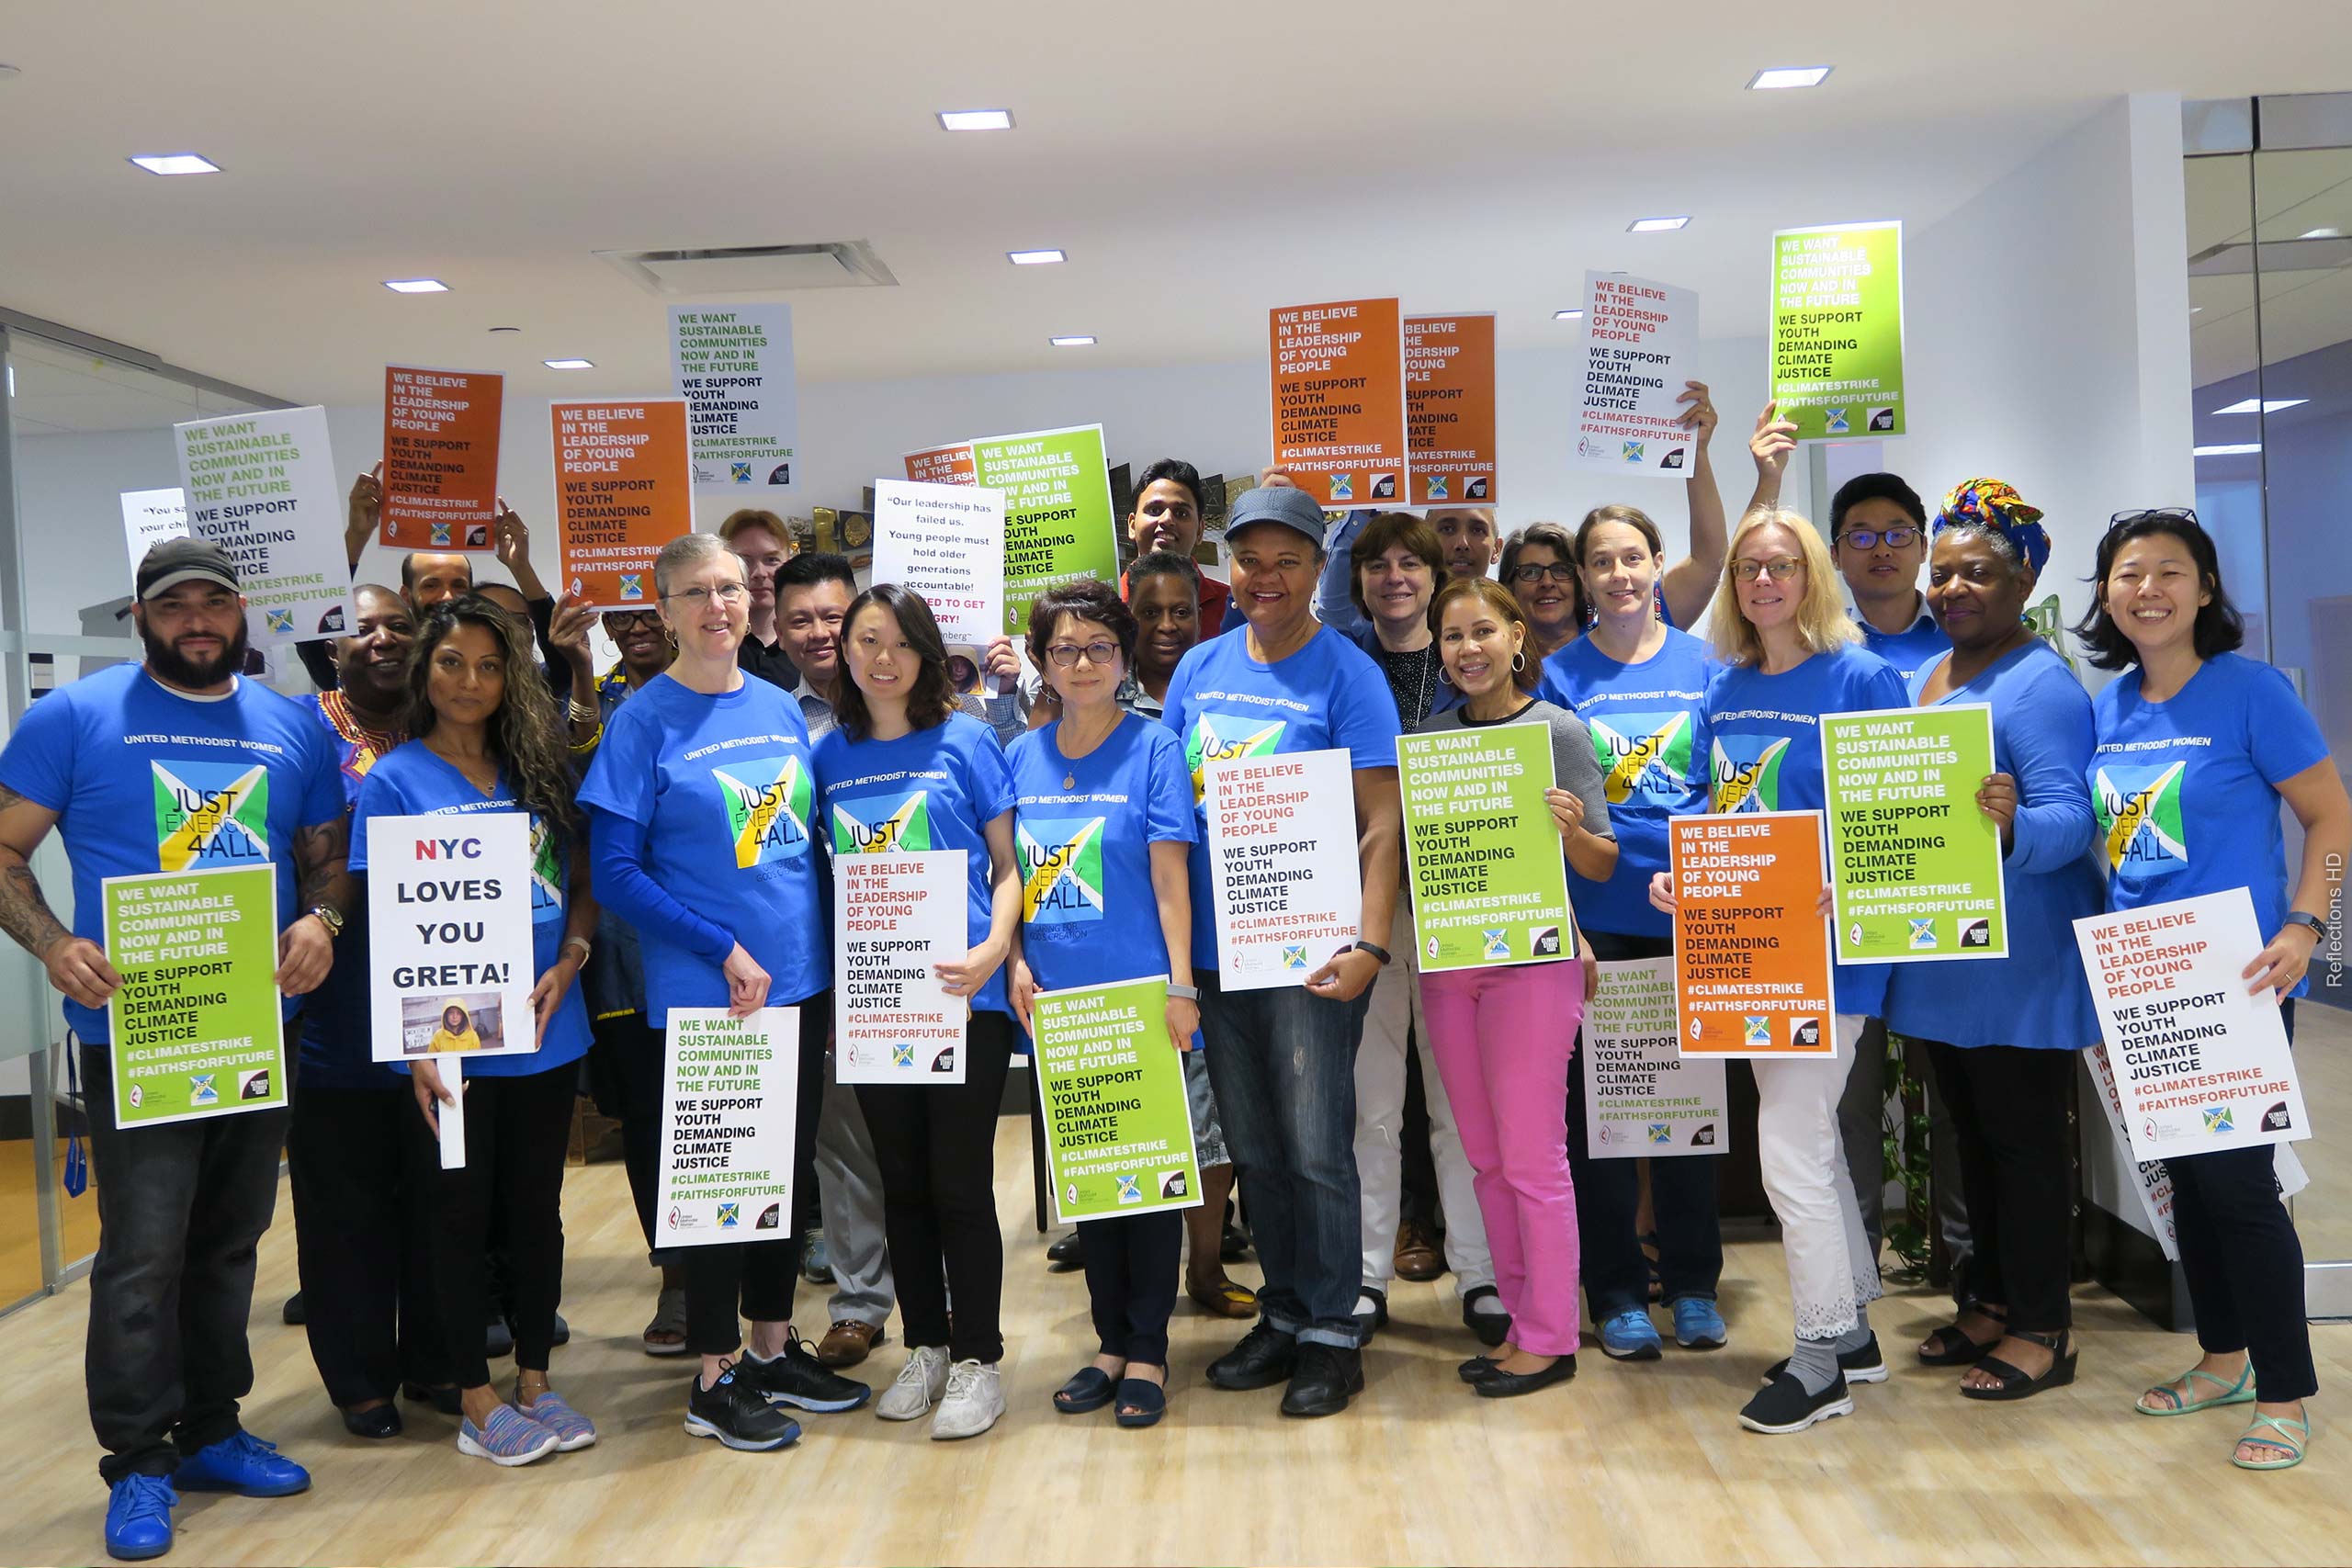 Group photo of United Women in Faith staff in the national office preparing for climate march